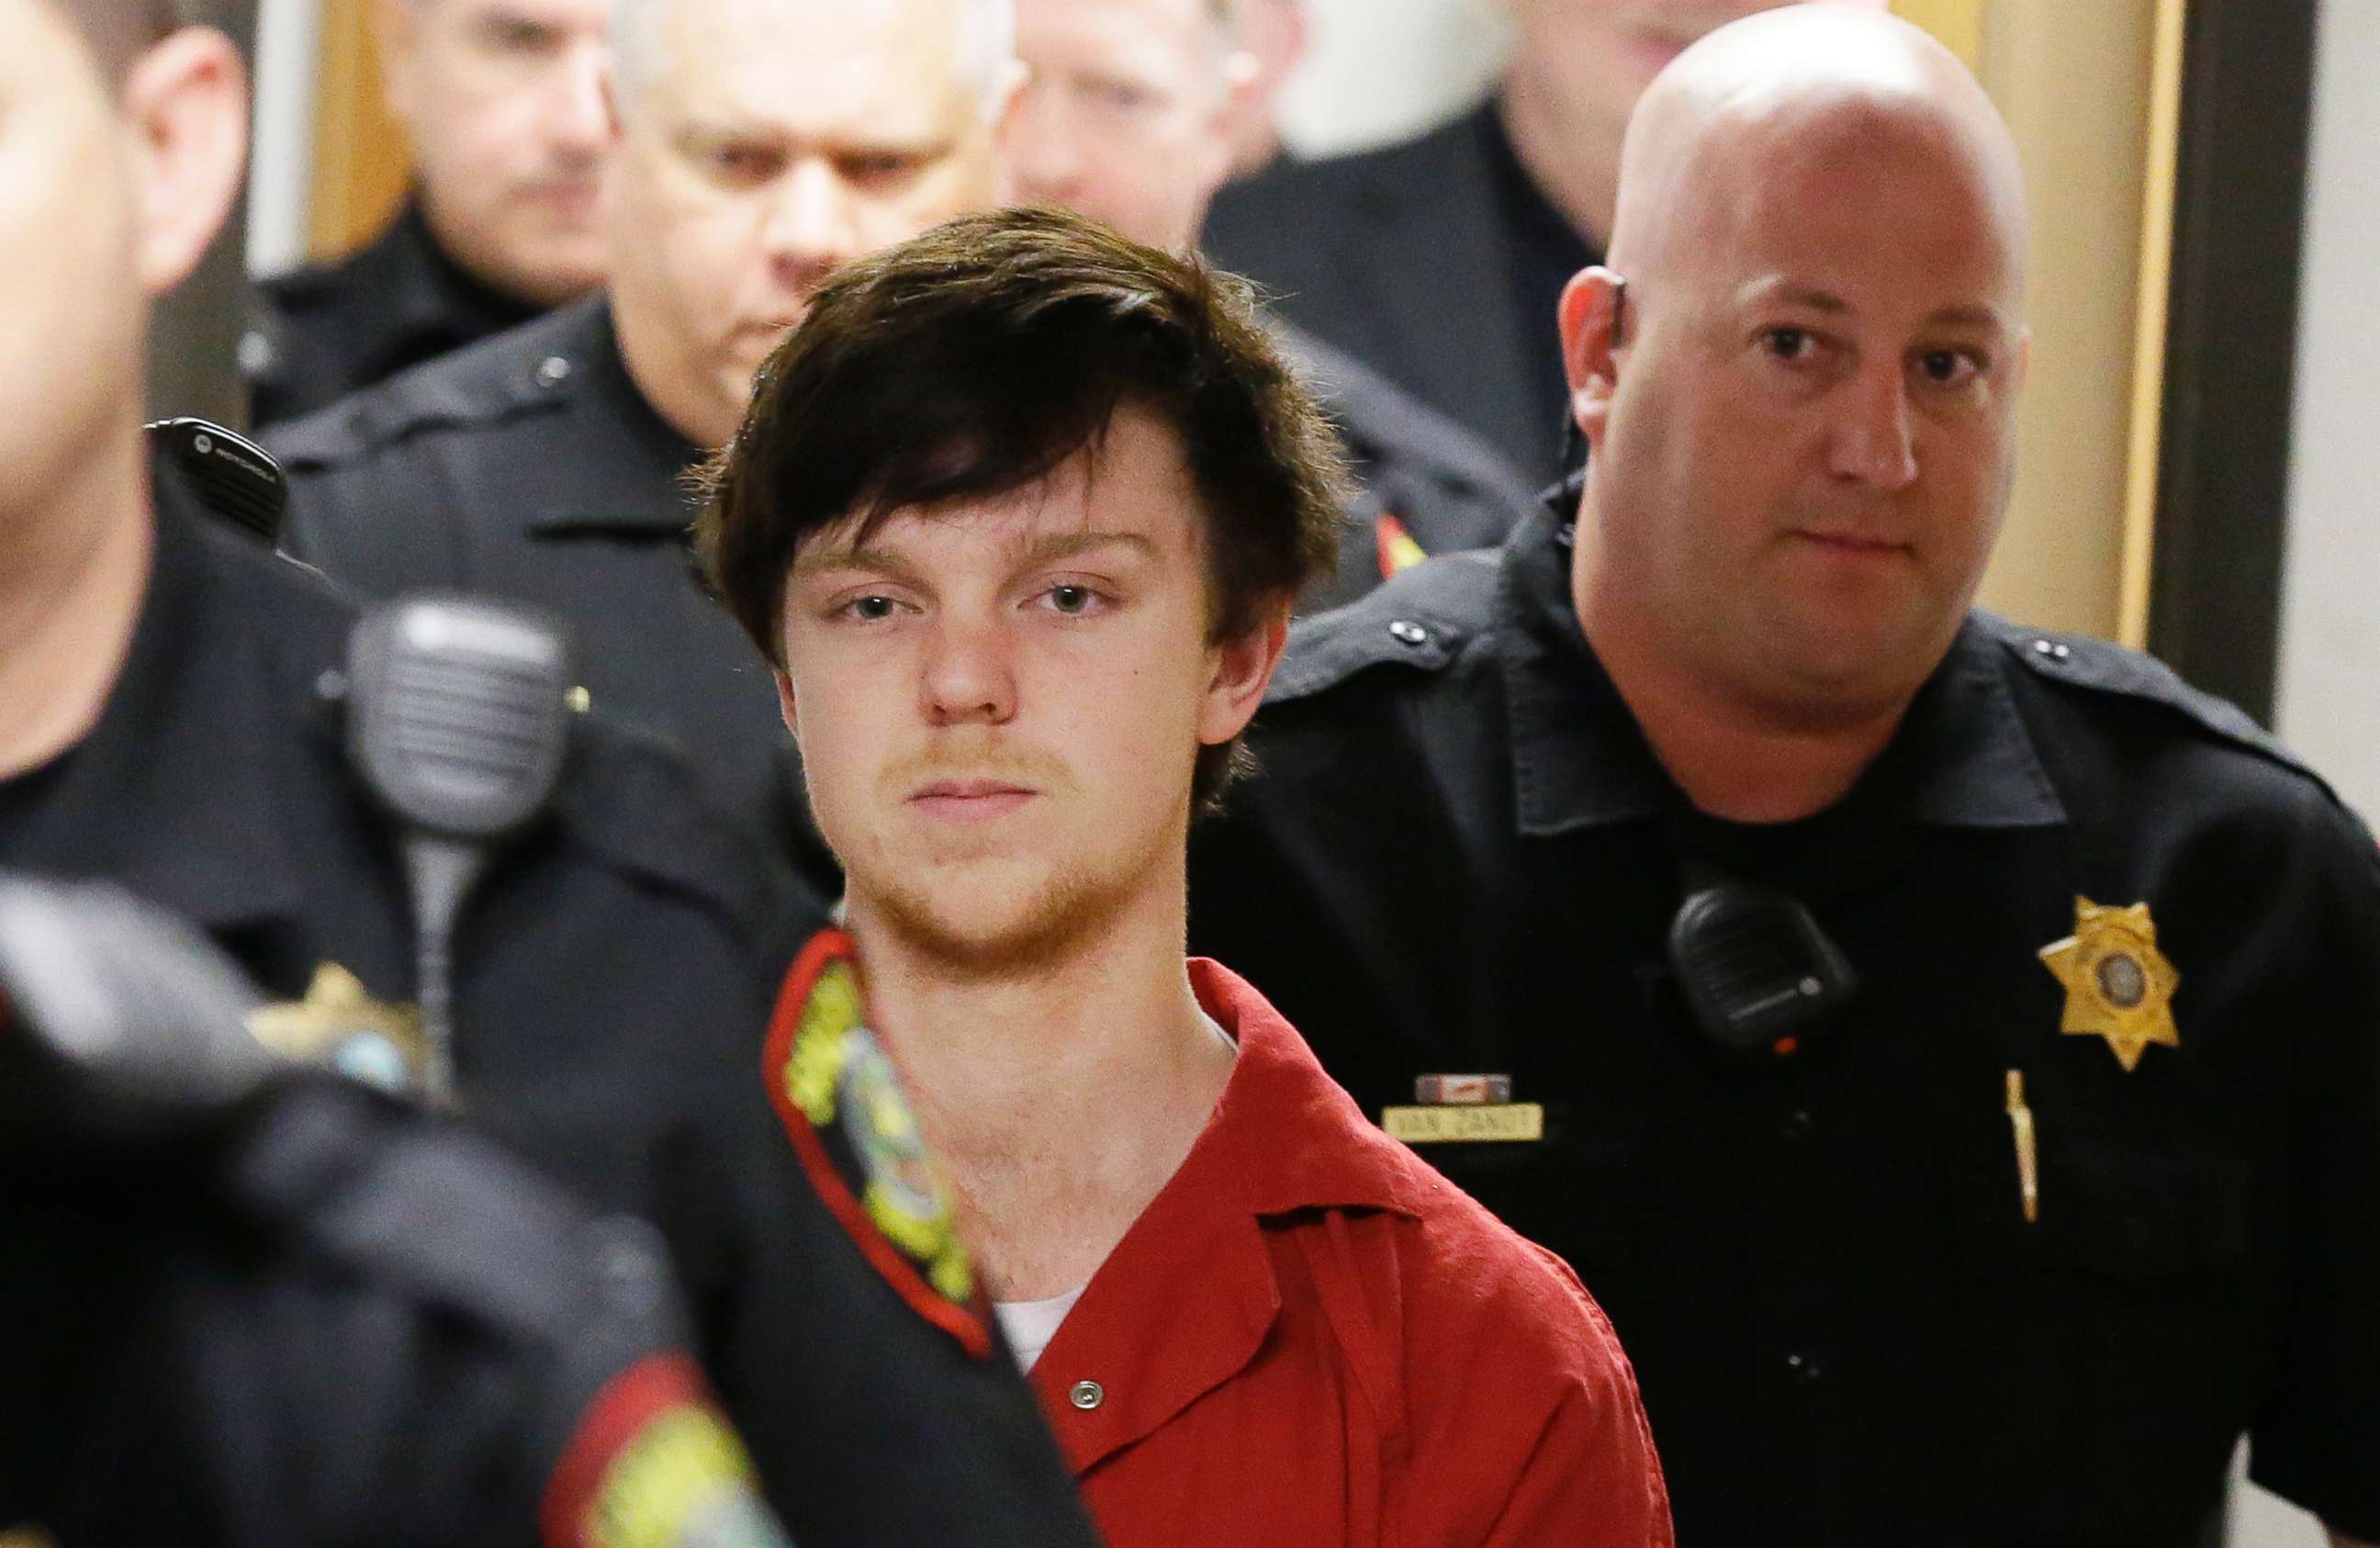 PHOTO: In this Feb. 19, 2016 file photo, Ethan Couch is led by sheriff deputies after a juvenile court for a hearing in Fort Worth, Texas.